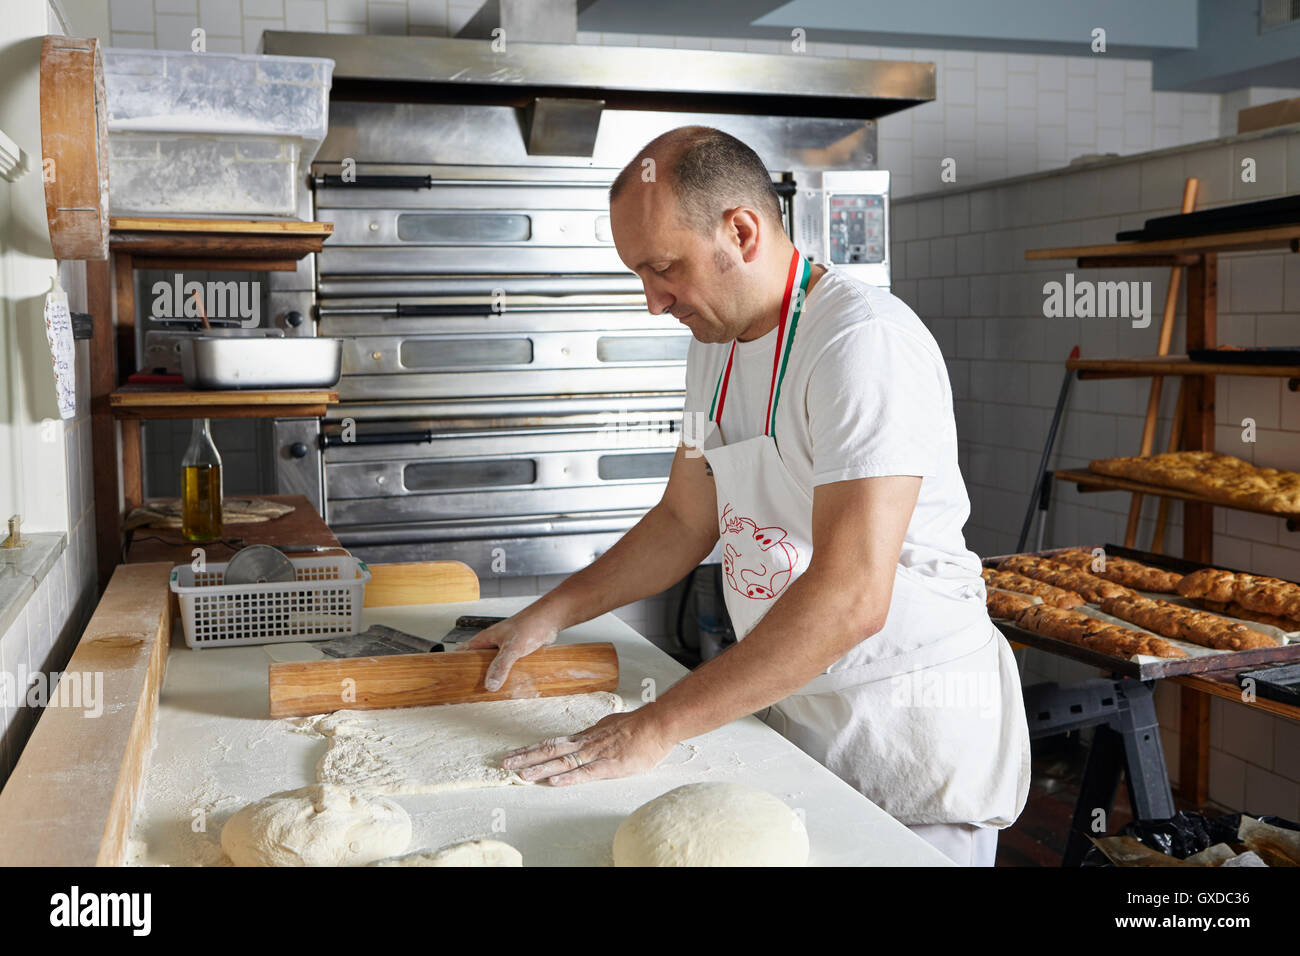 Baker working in bakery Banque D'Images